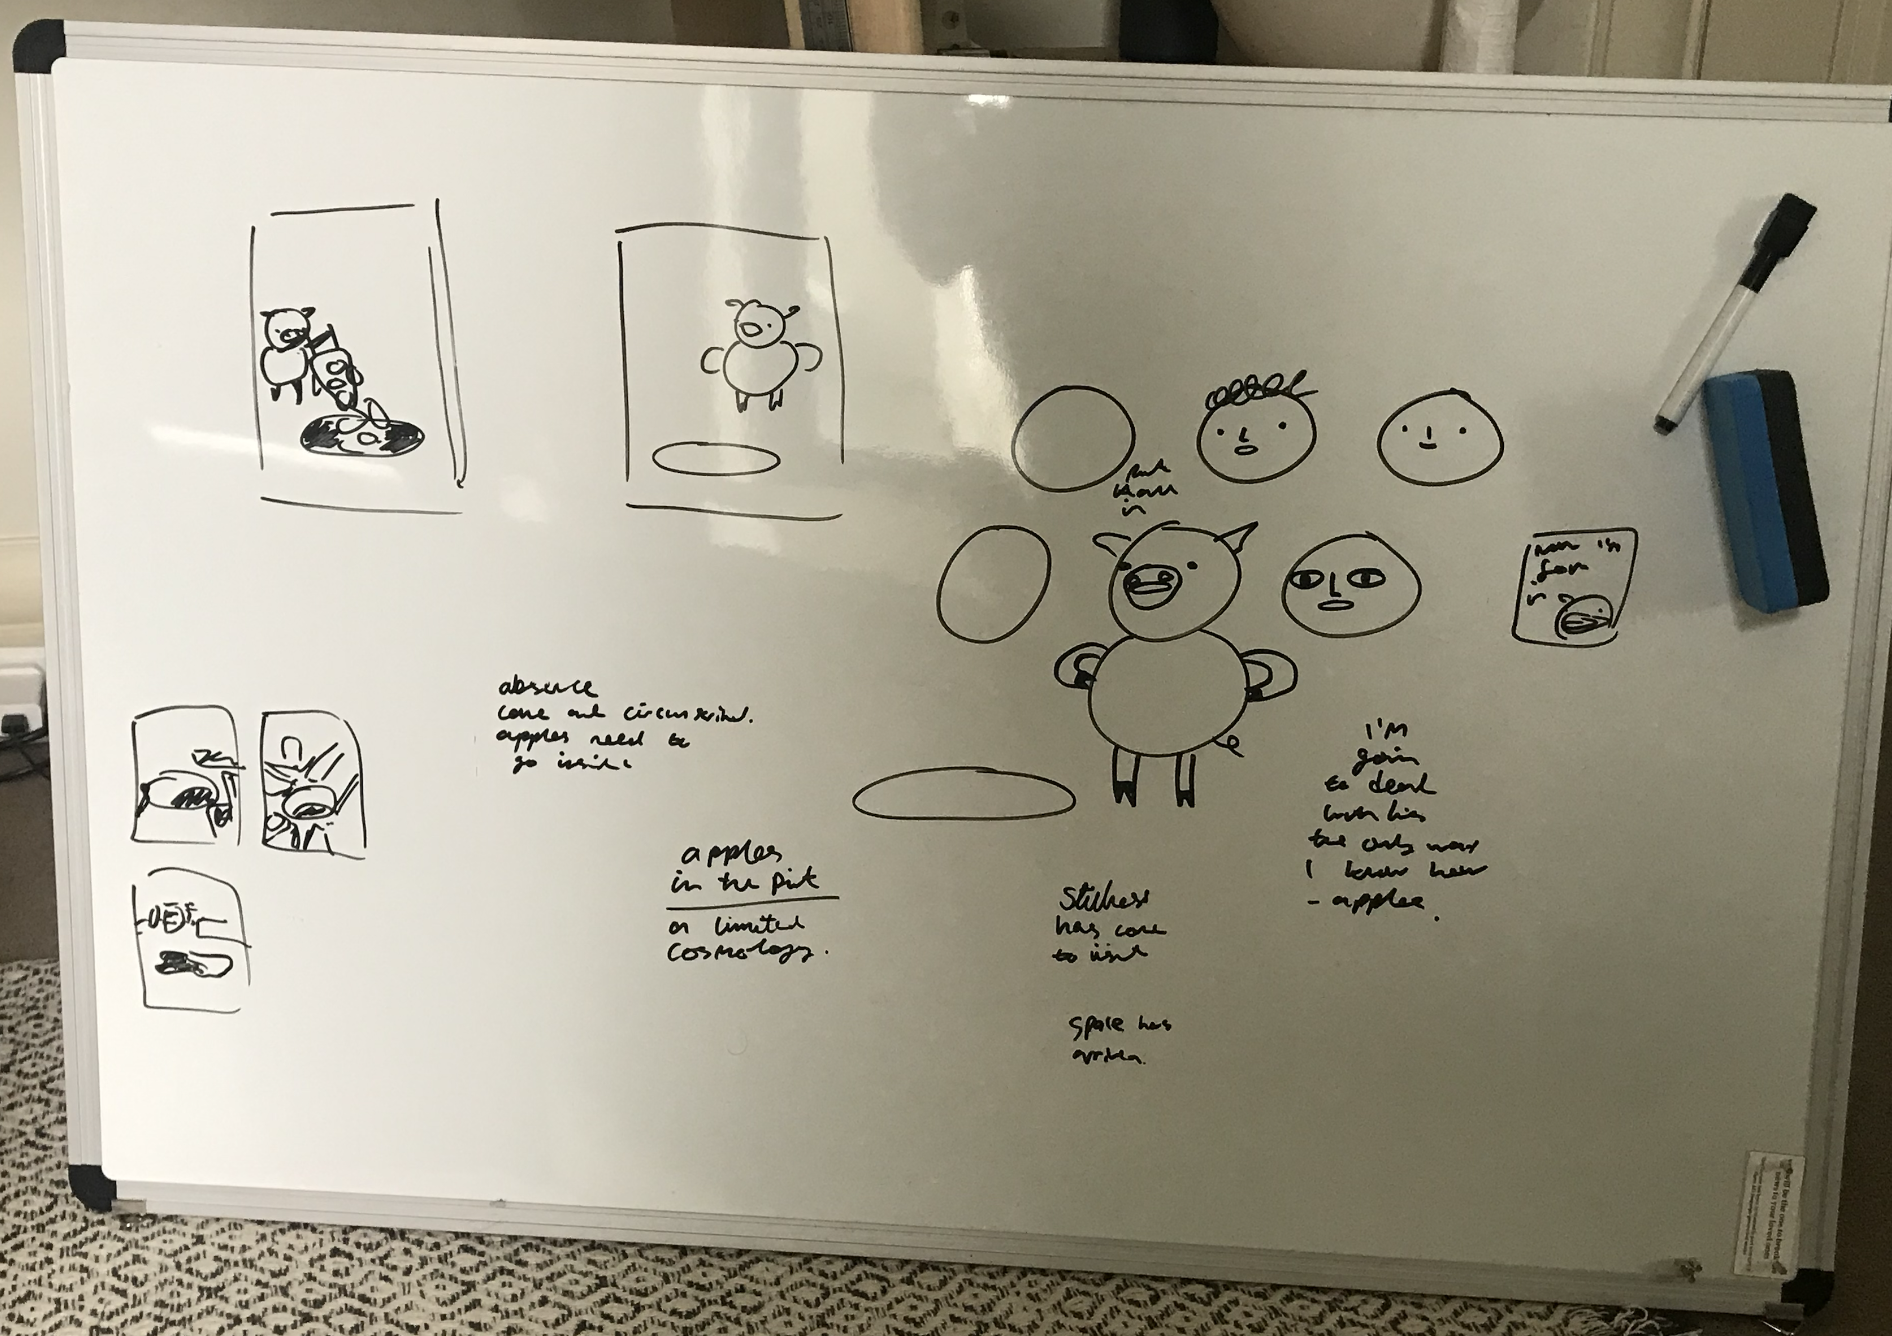 Whiteboard drawings with a pig, some sketches of sinkholes, and the pig pushing a wheelbarrow of lumps into a hole